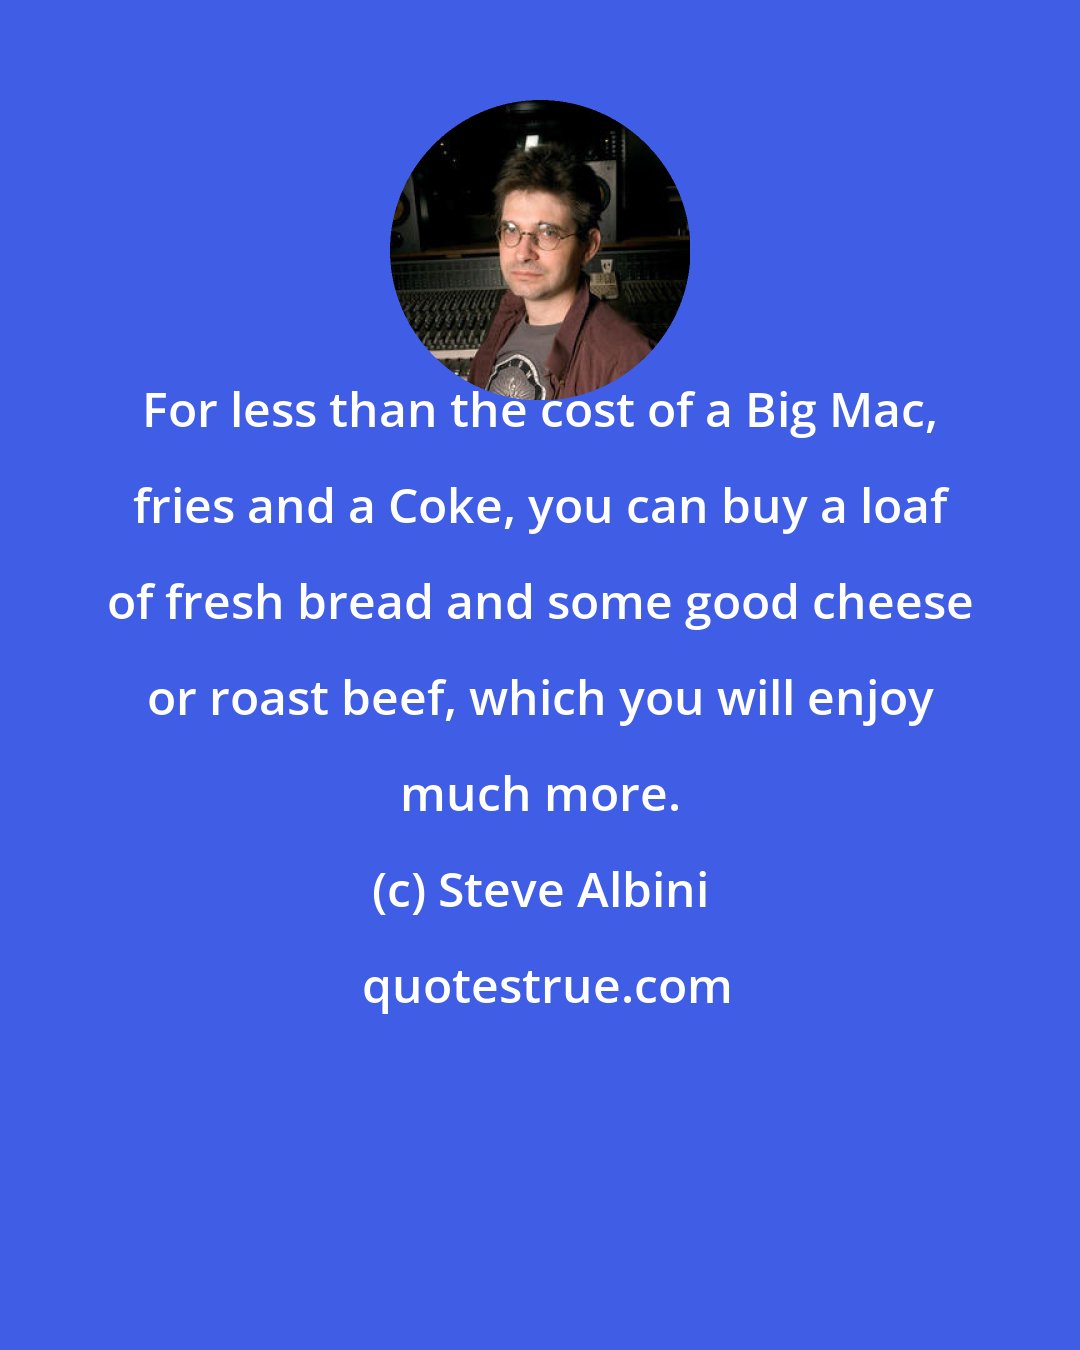 Steve Albini: For less than the cost of a Big Mac, fries and a Coke, you can buy a loaf of fresh bread and some good cheese or roast beef, which you will enjoy much more.